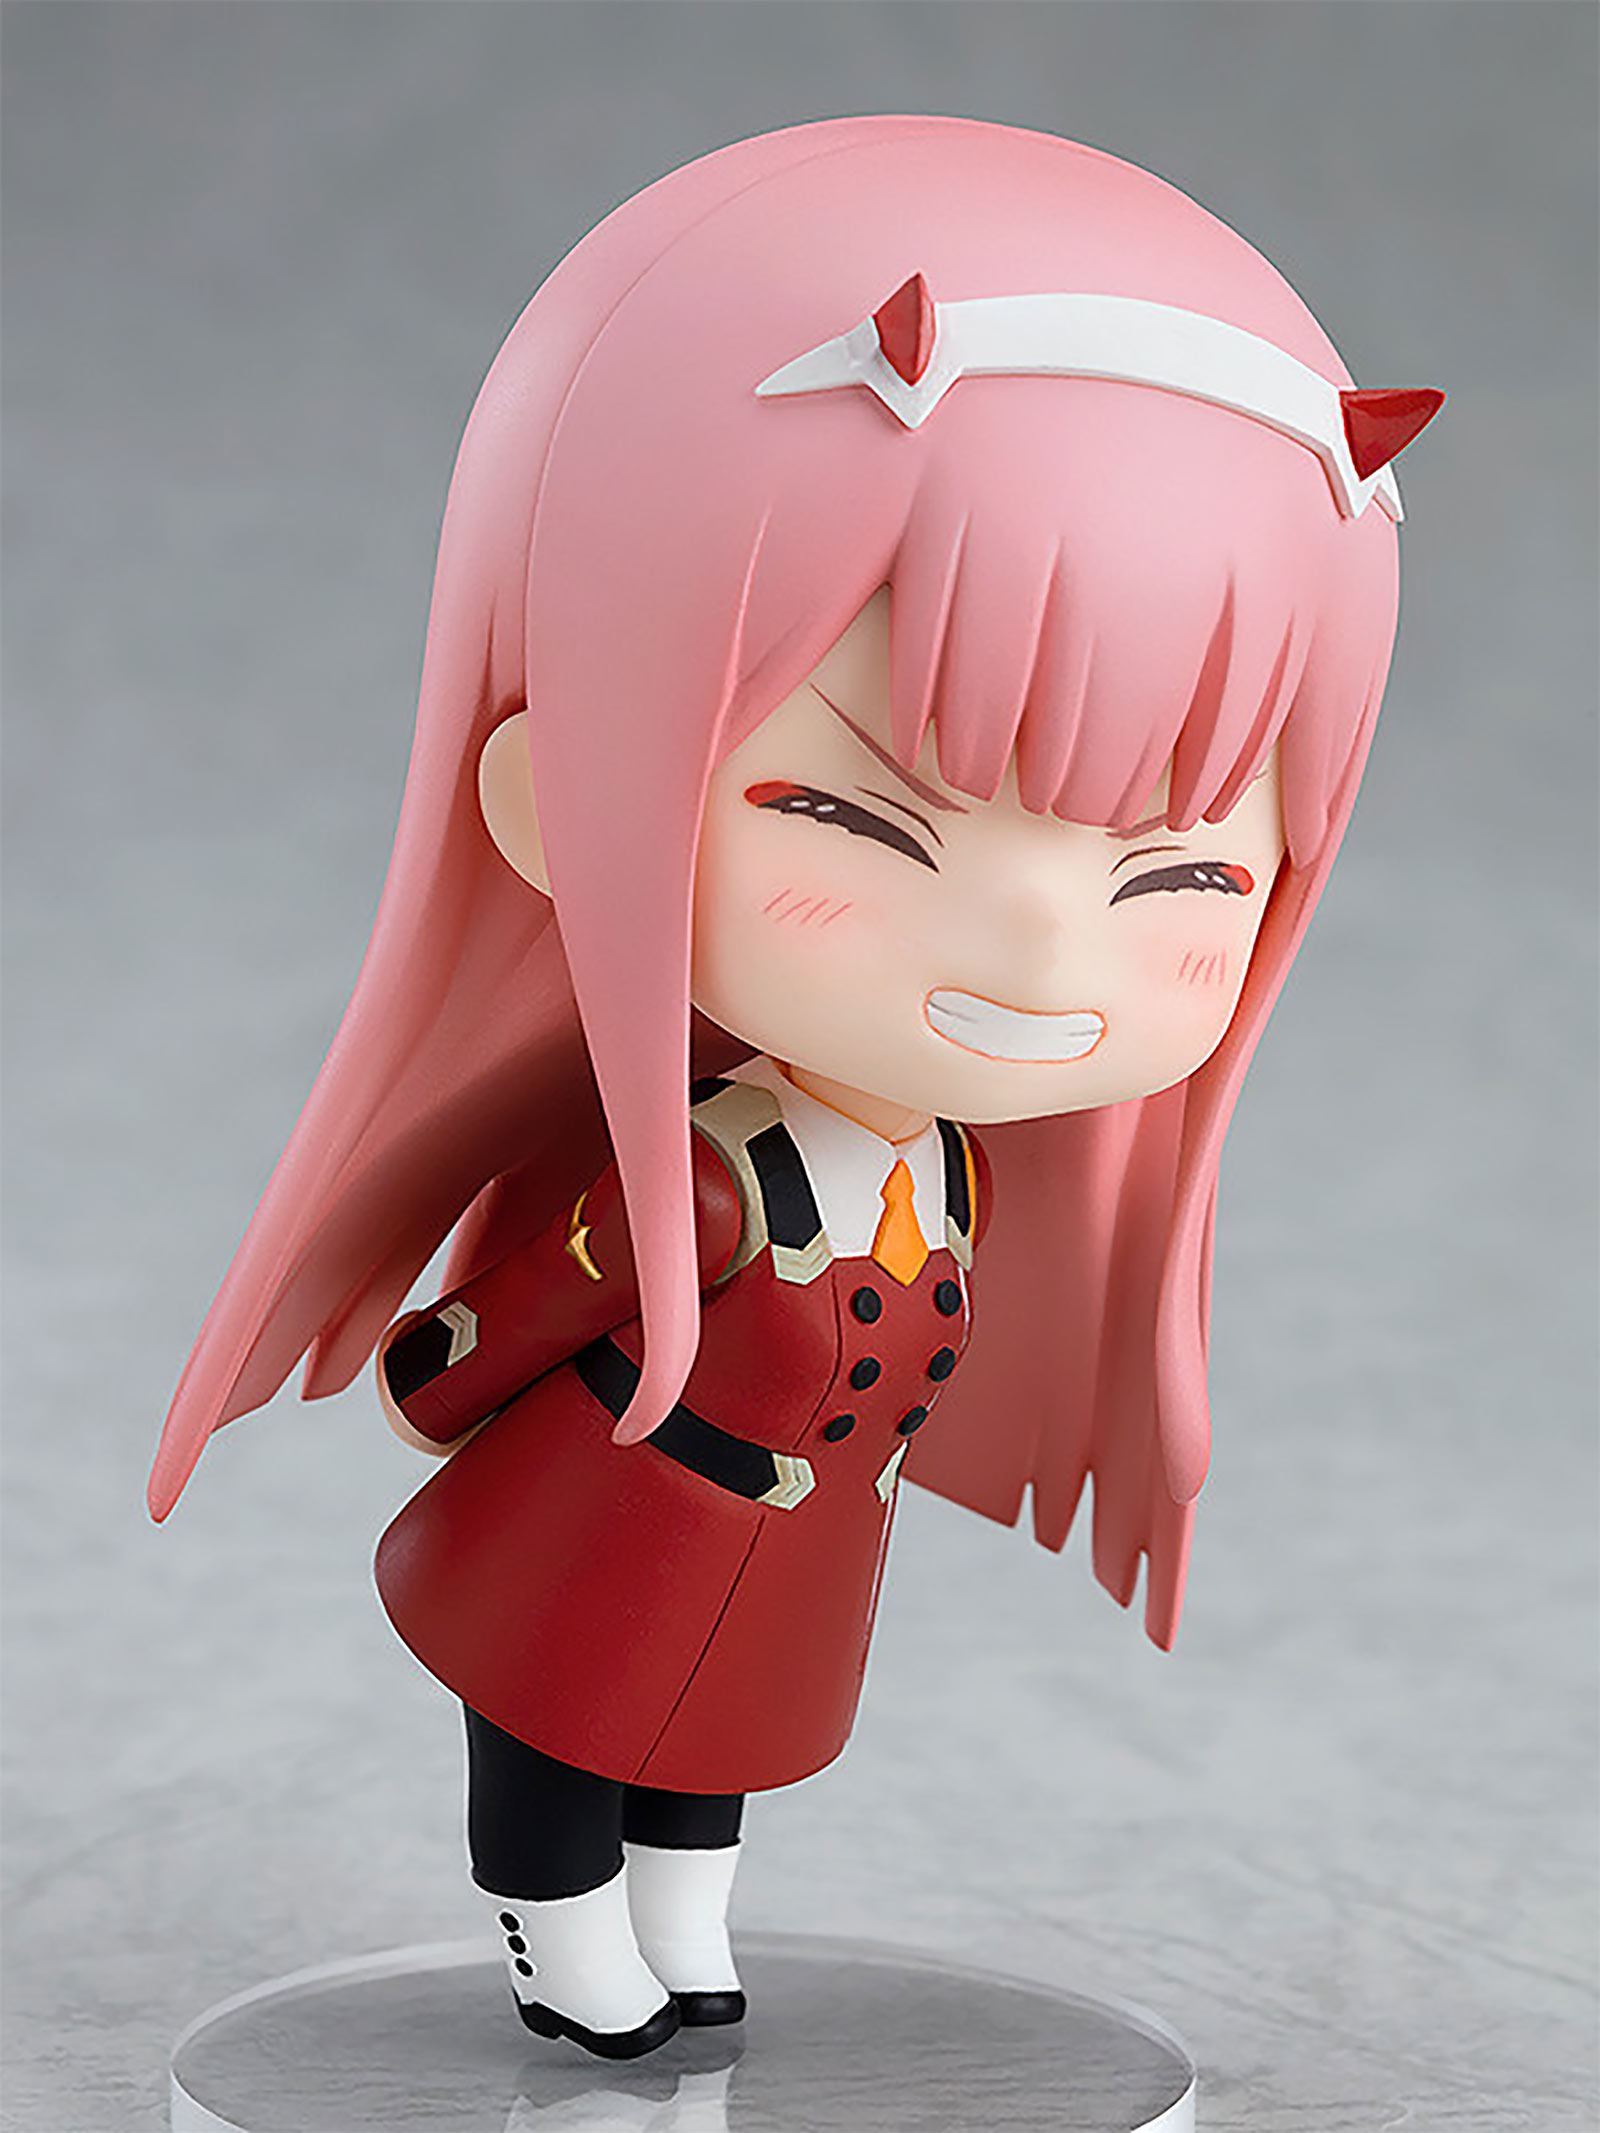 DARLING in the FRANXX - Zero Two Nendoroid Figurine d'action